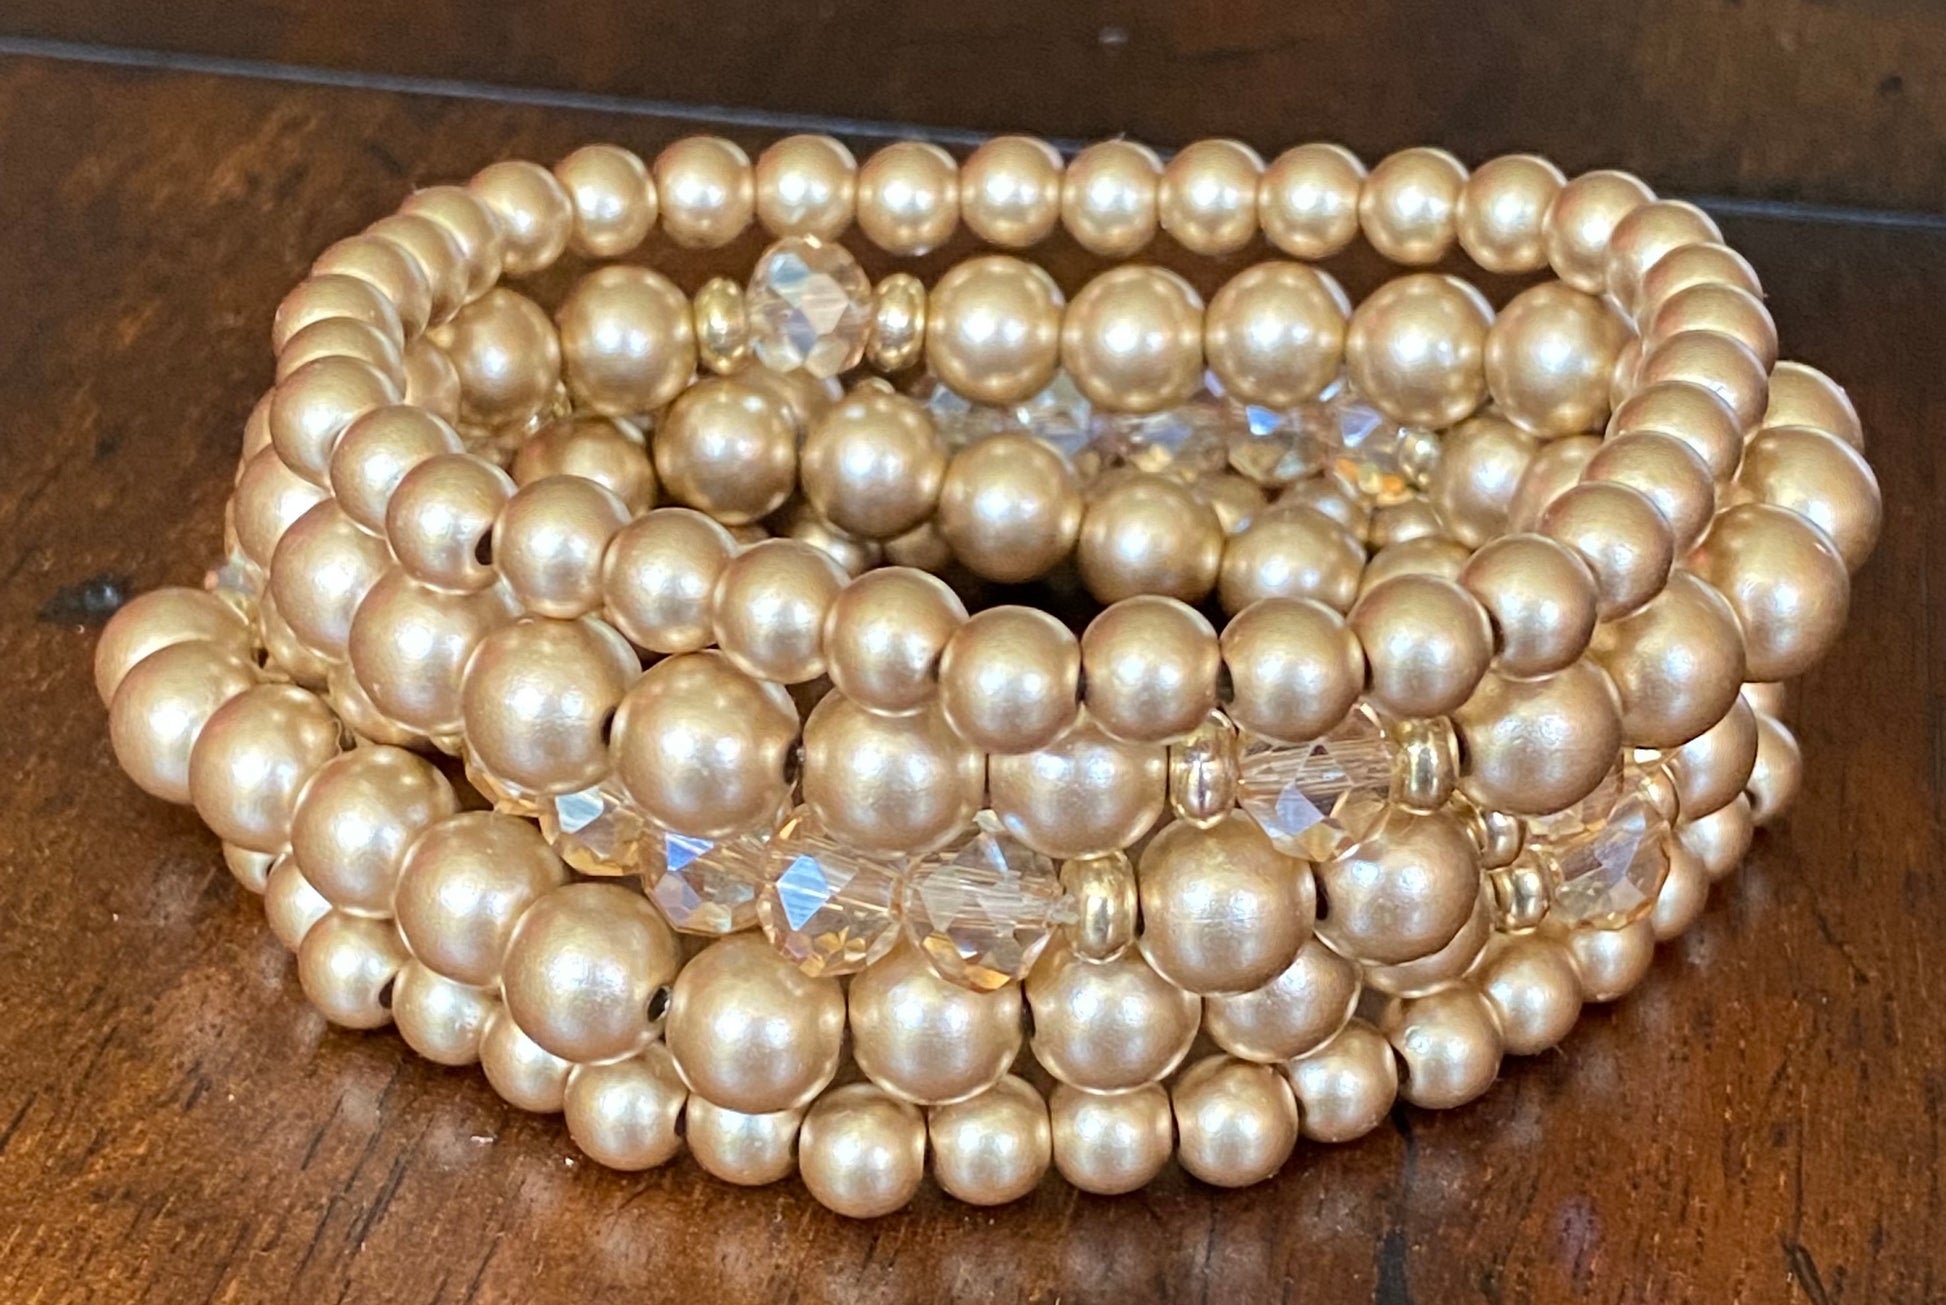 matte gold and crystal stretch bracelets, set of 5' approximately 7.5 inches in length